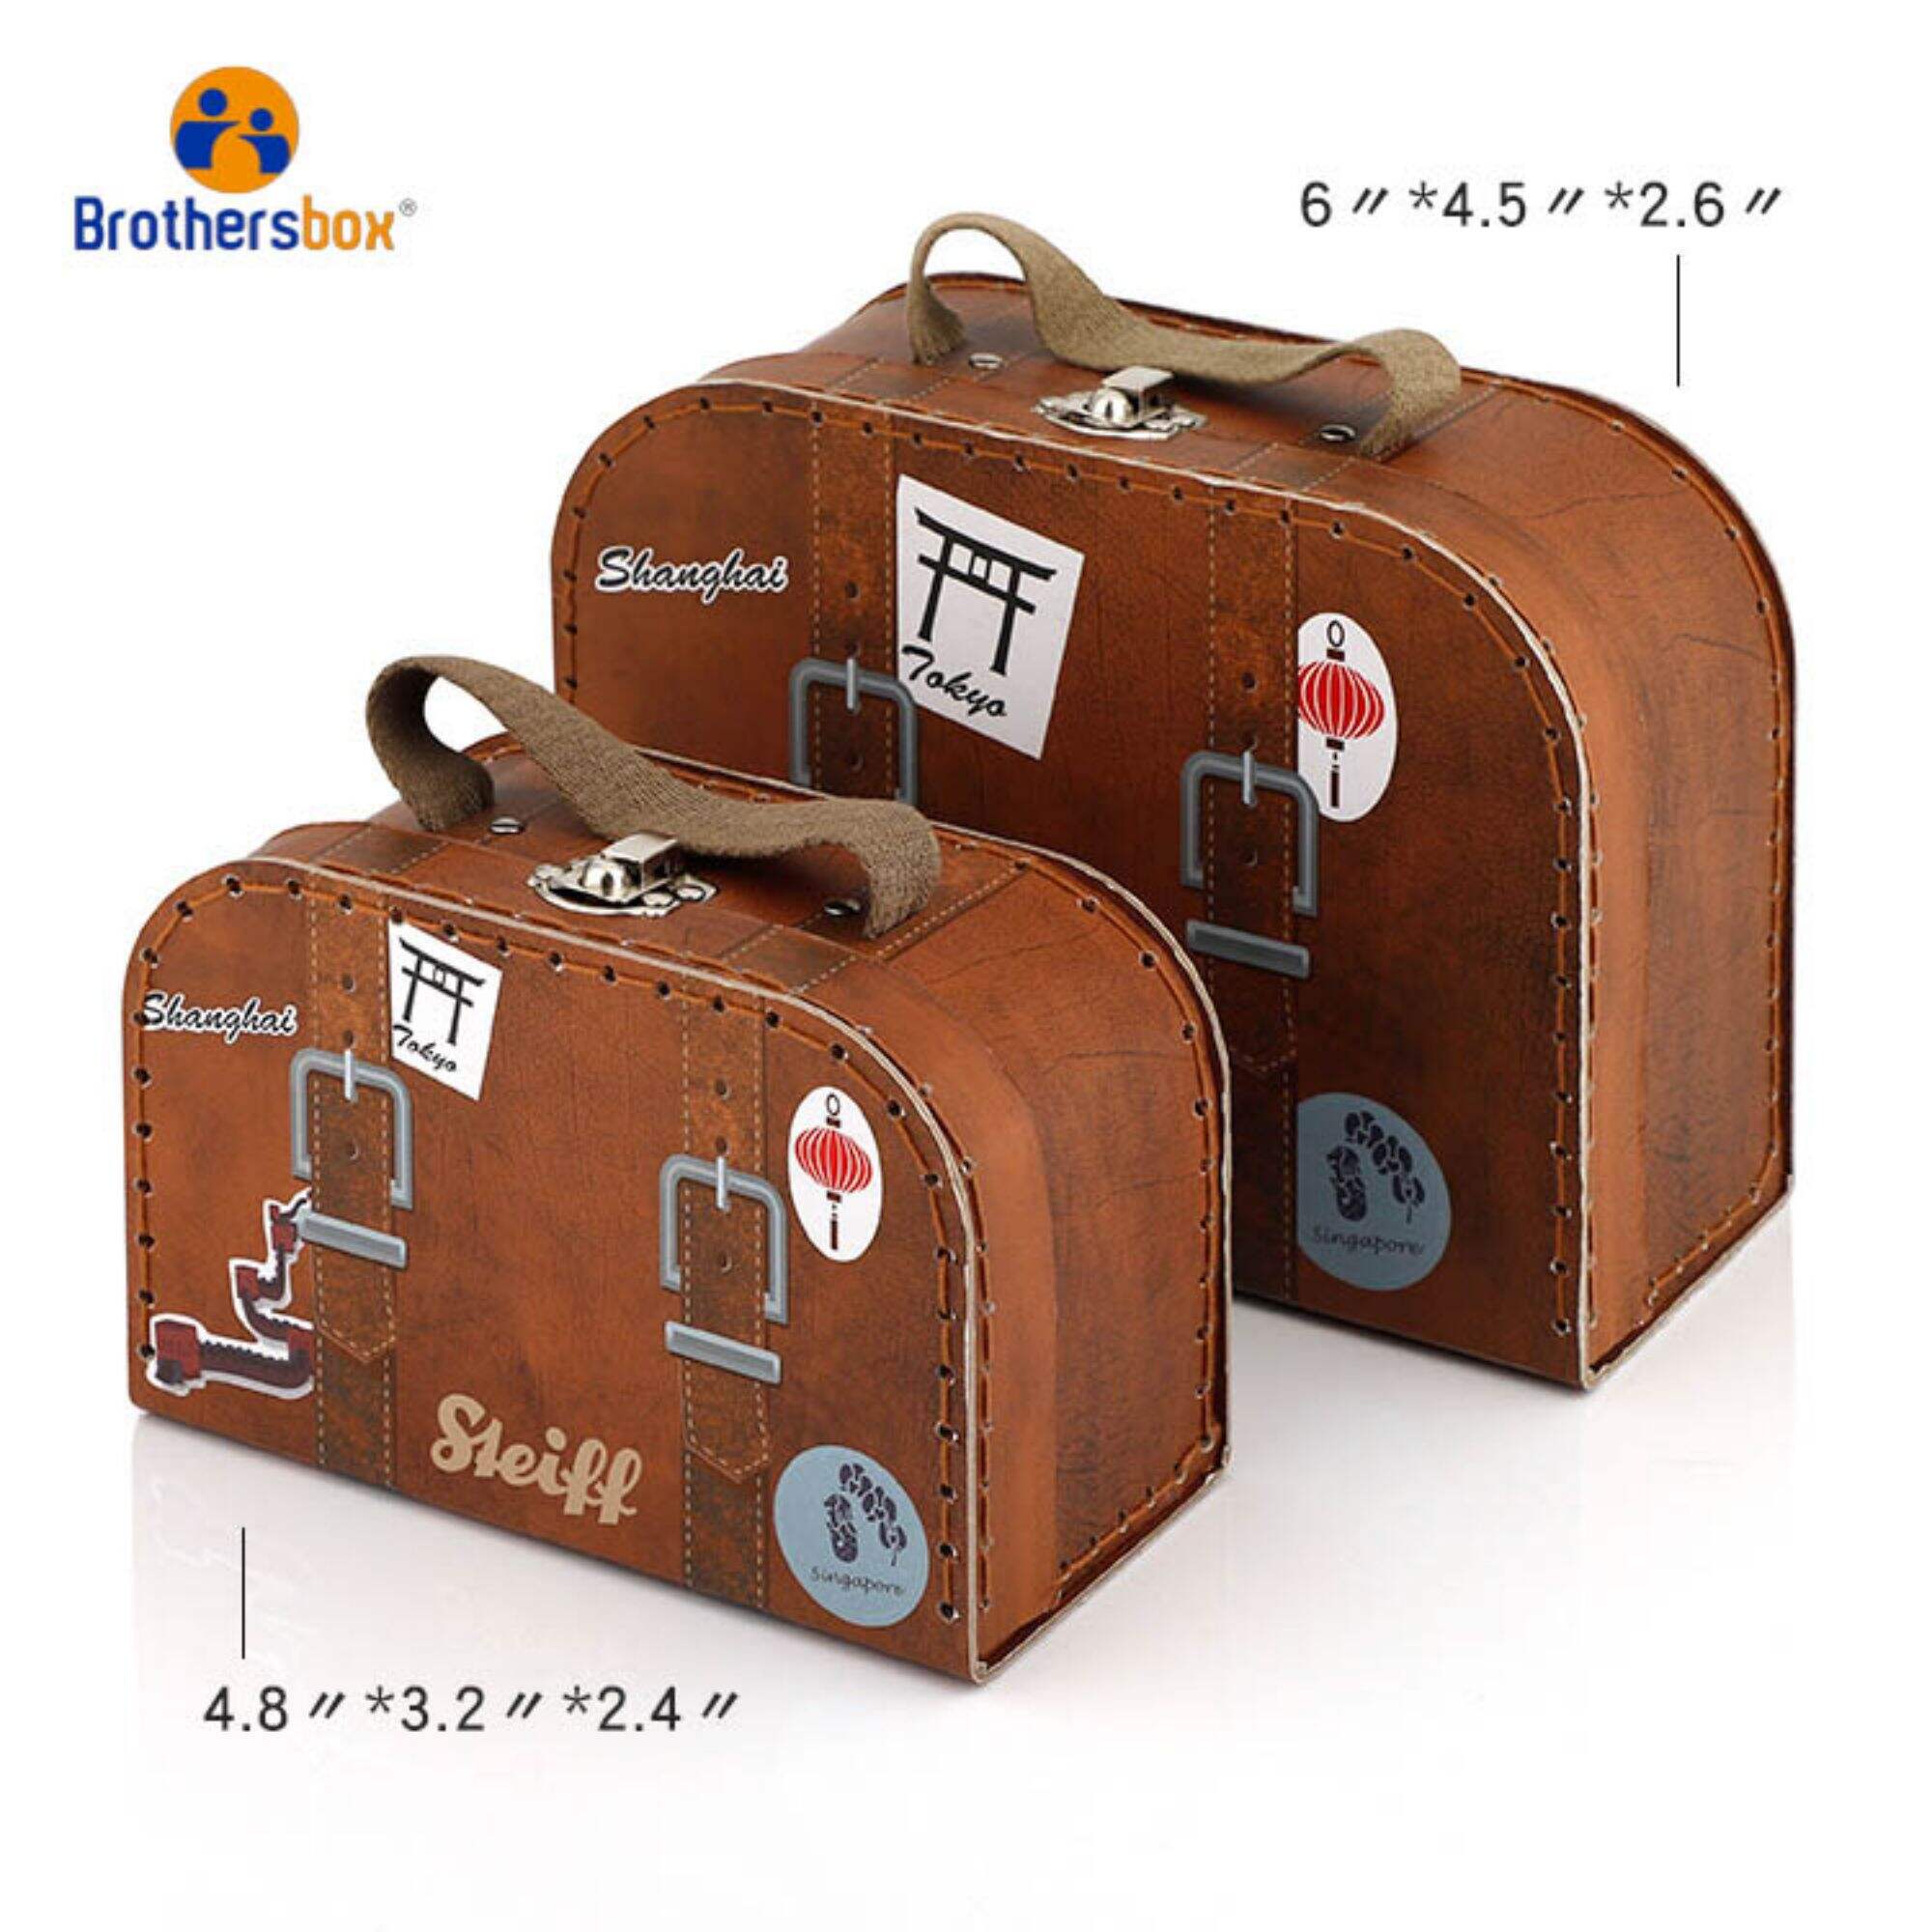 Vintage Cardboard Suitcase Box For Children Product